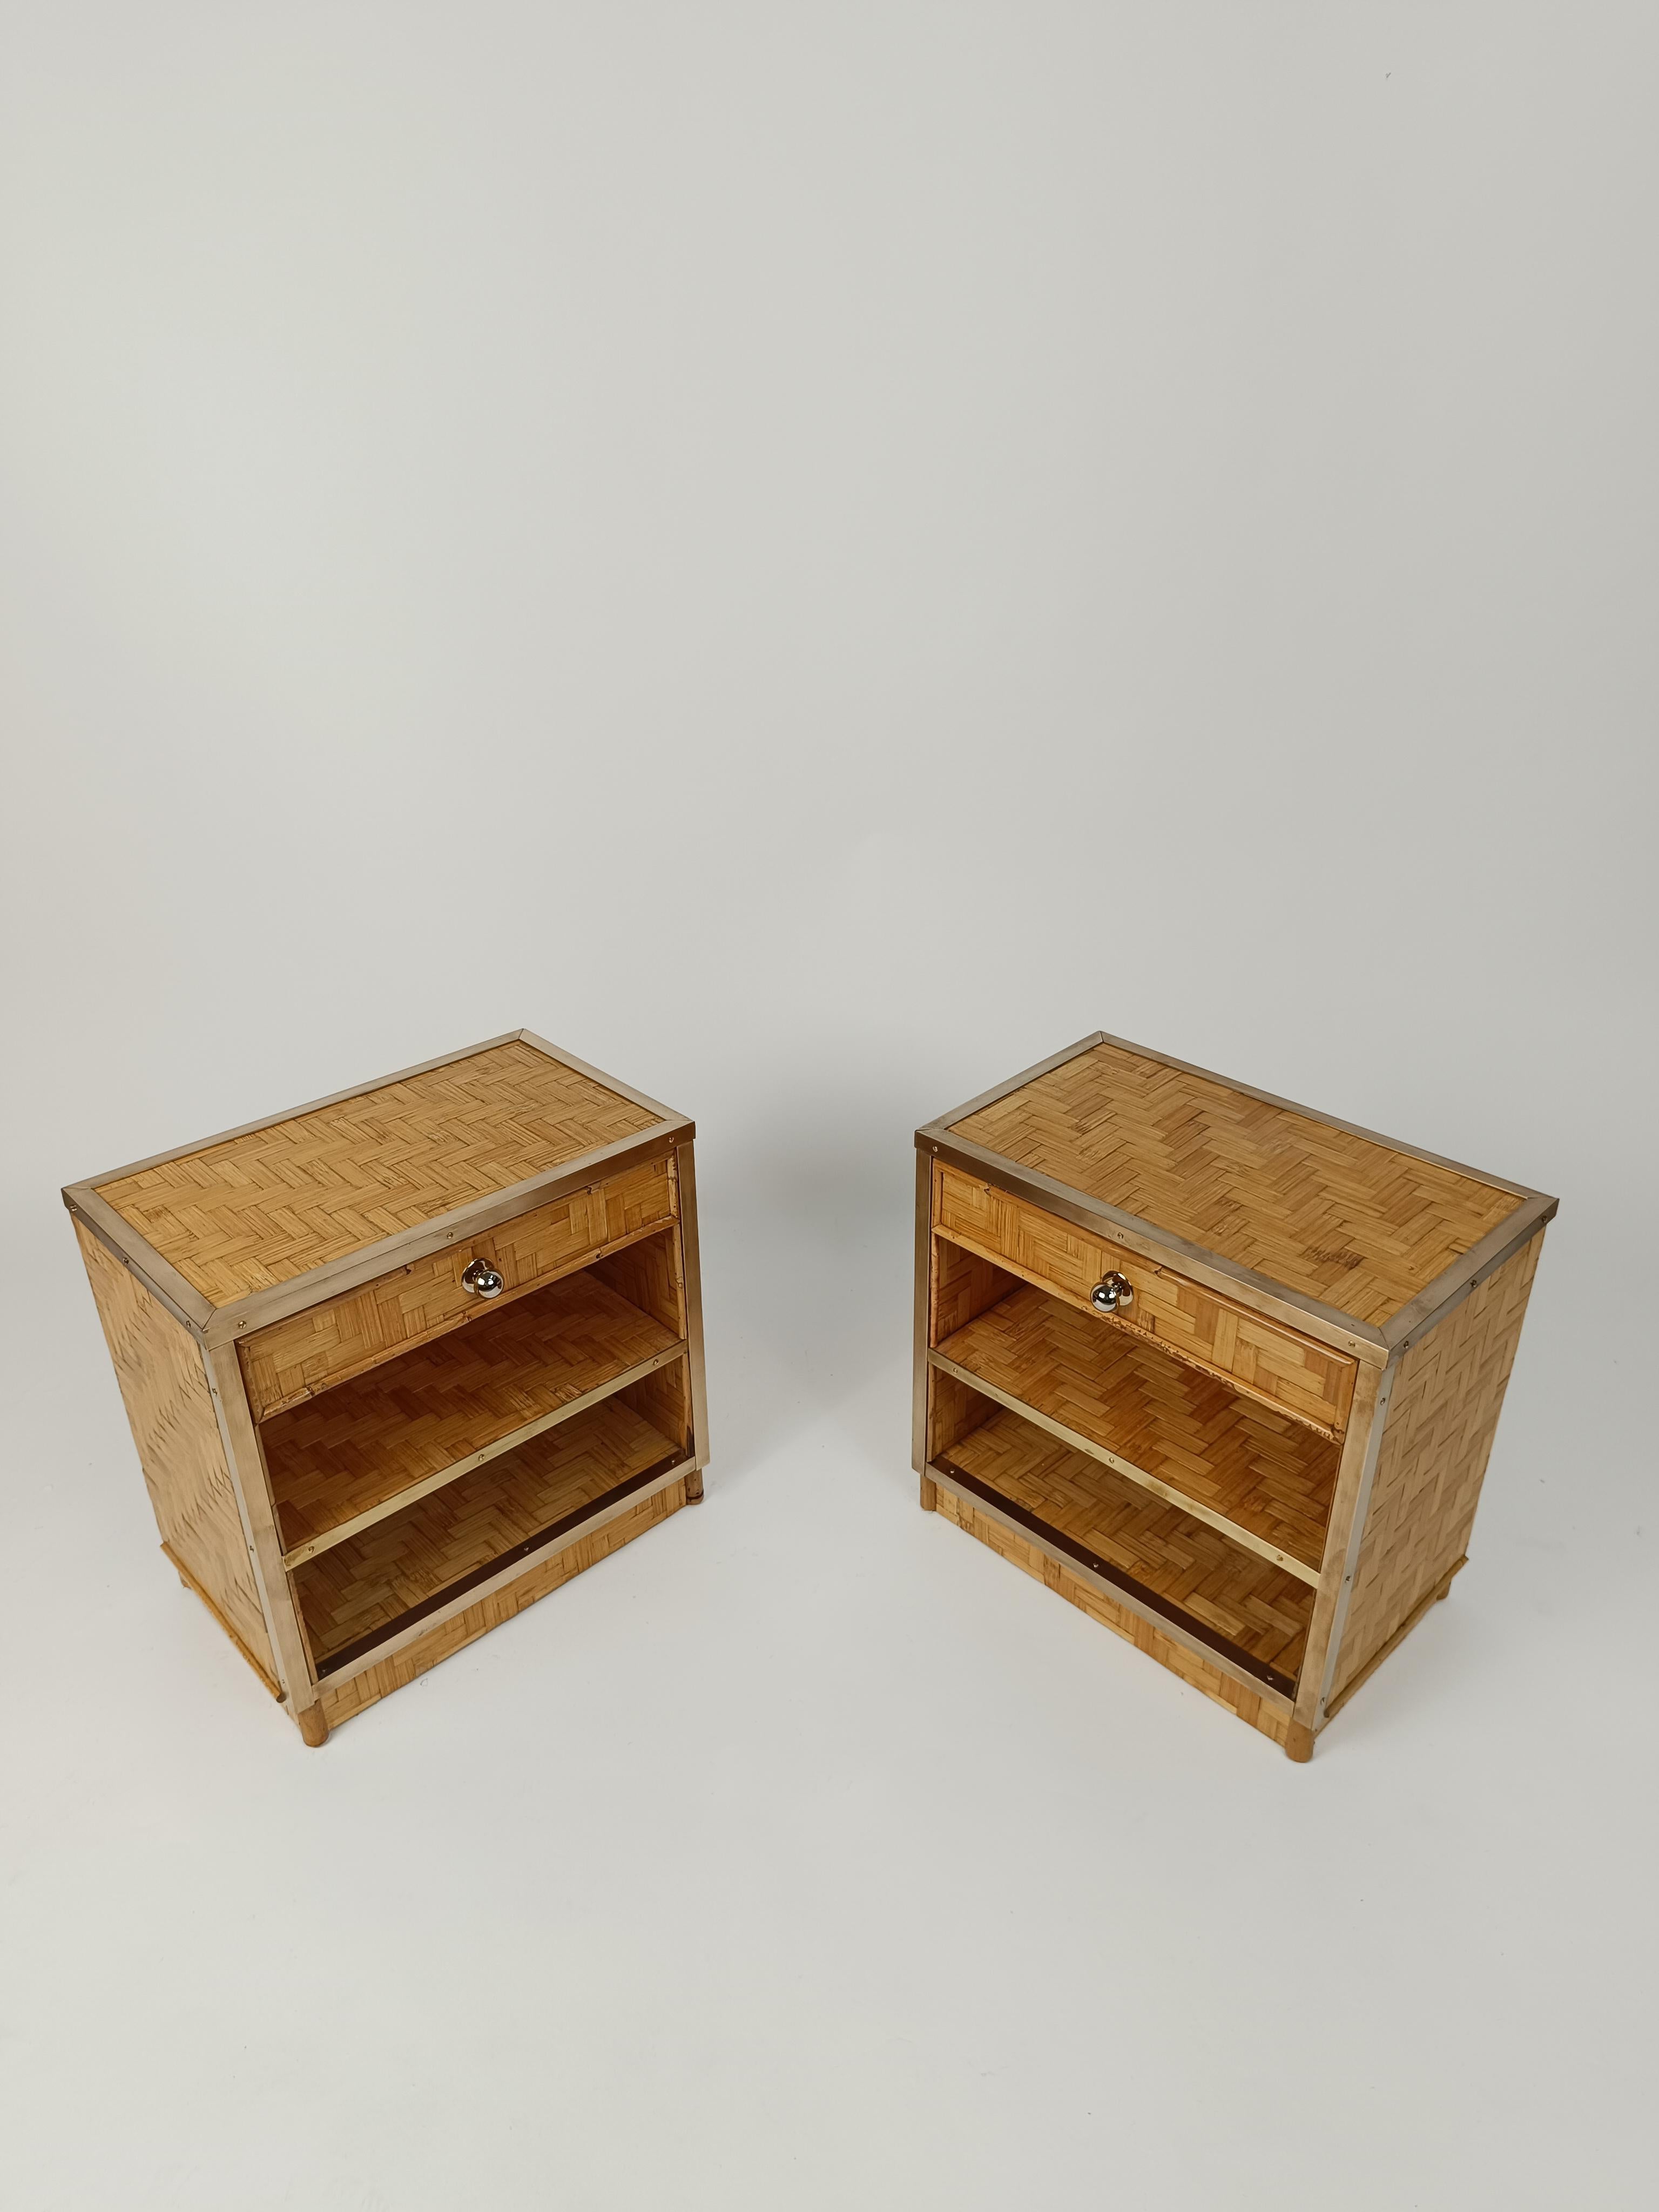 Mid-Century Modern Midcentury Italian Bedside Tables in Bamboo Cane, Rattan and Brass, 1970s For Sale